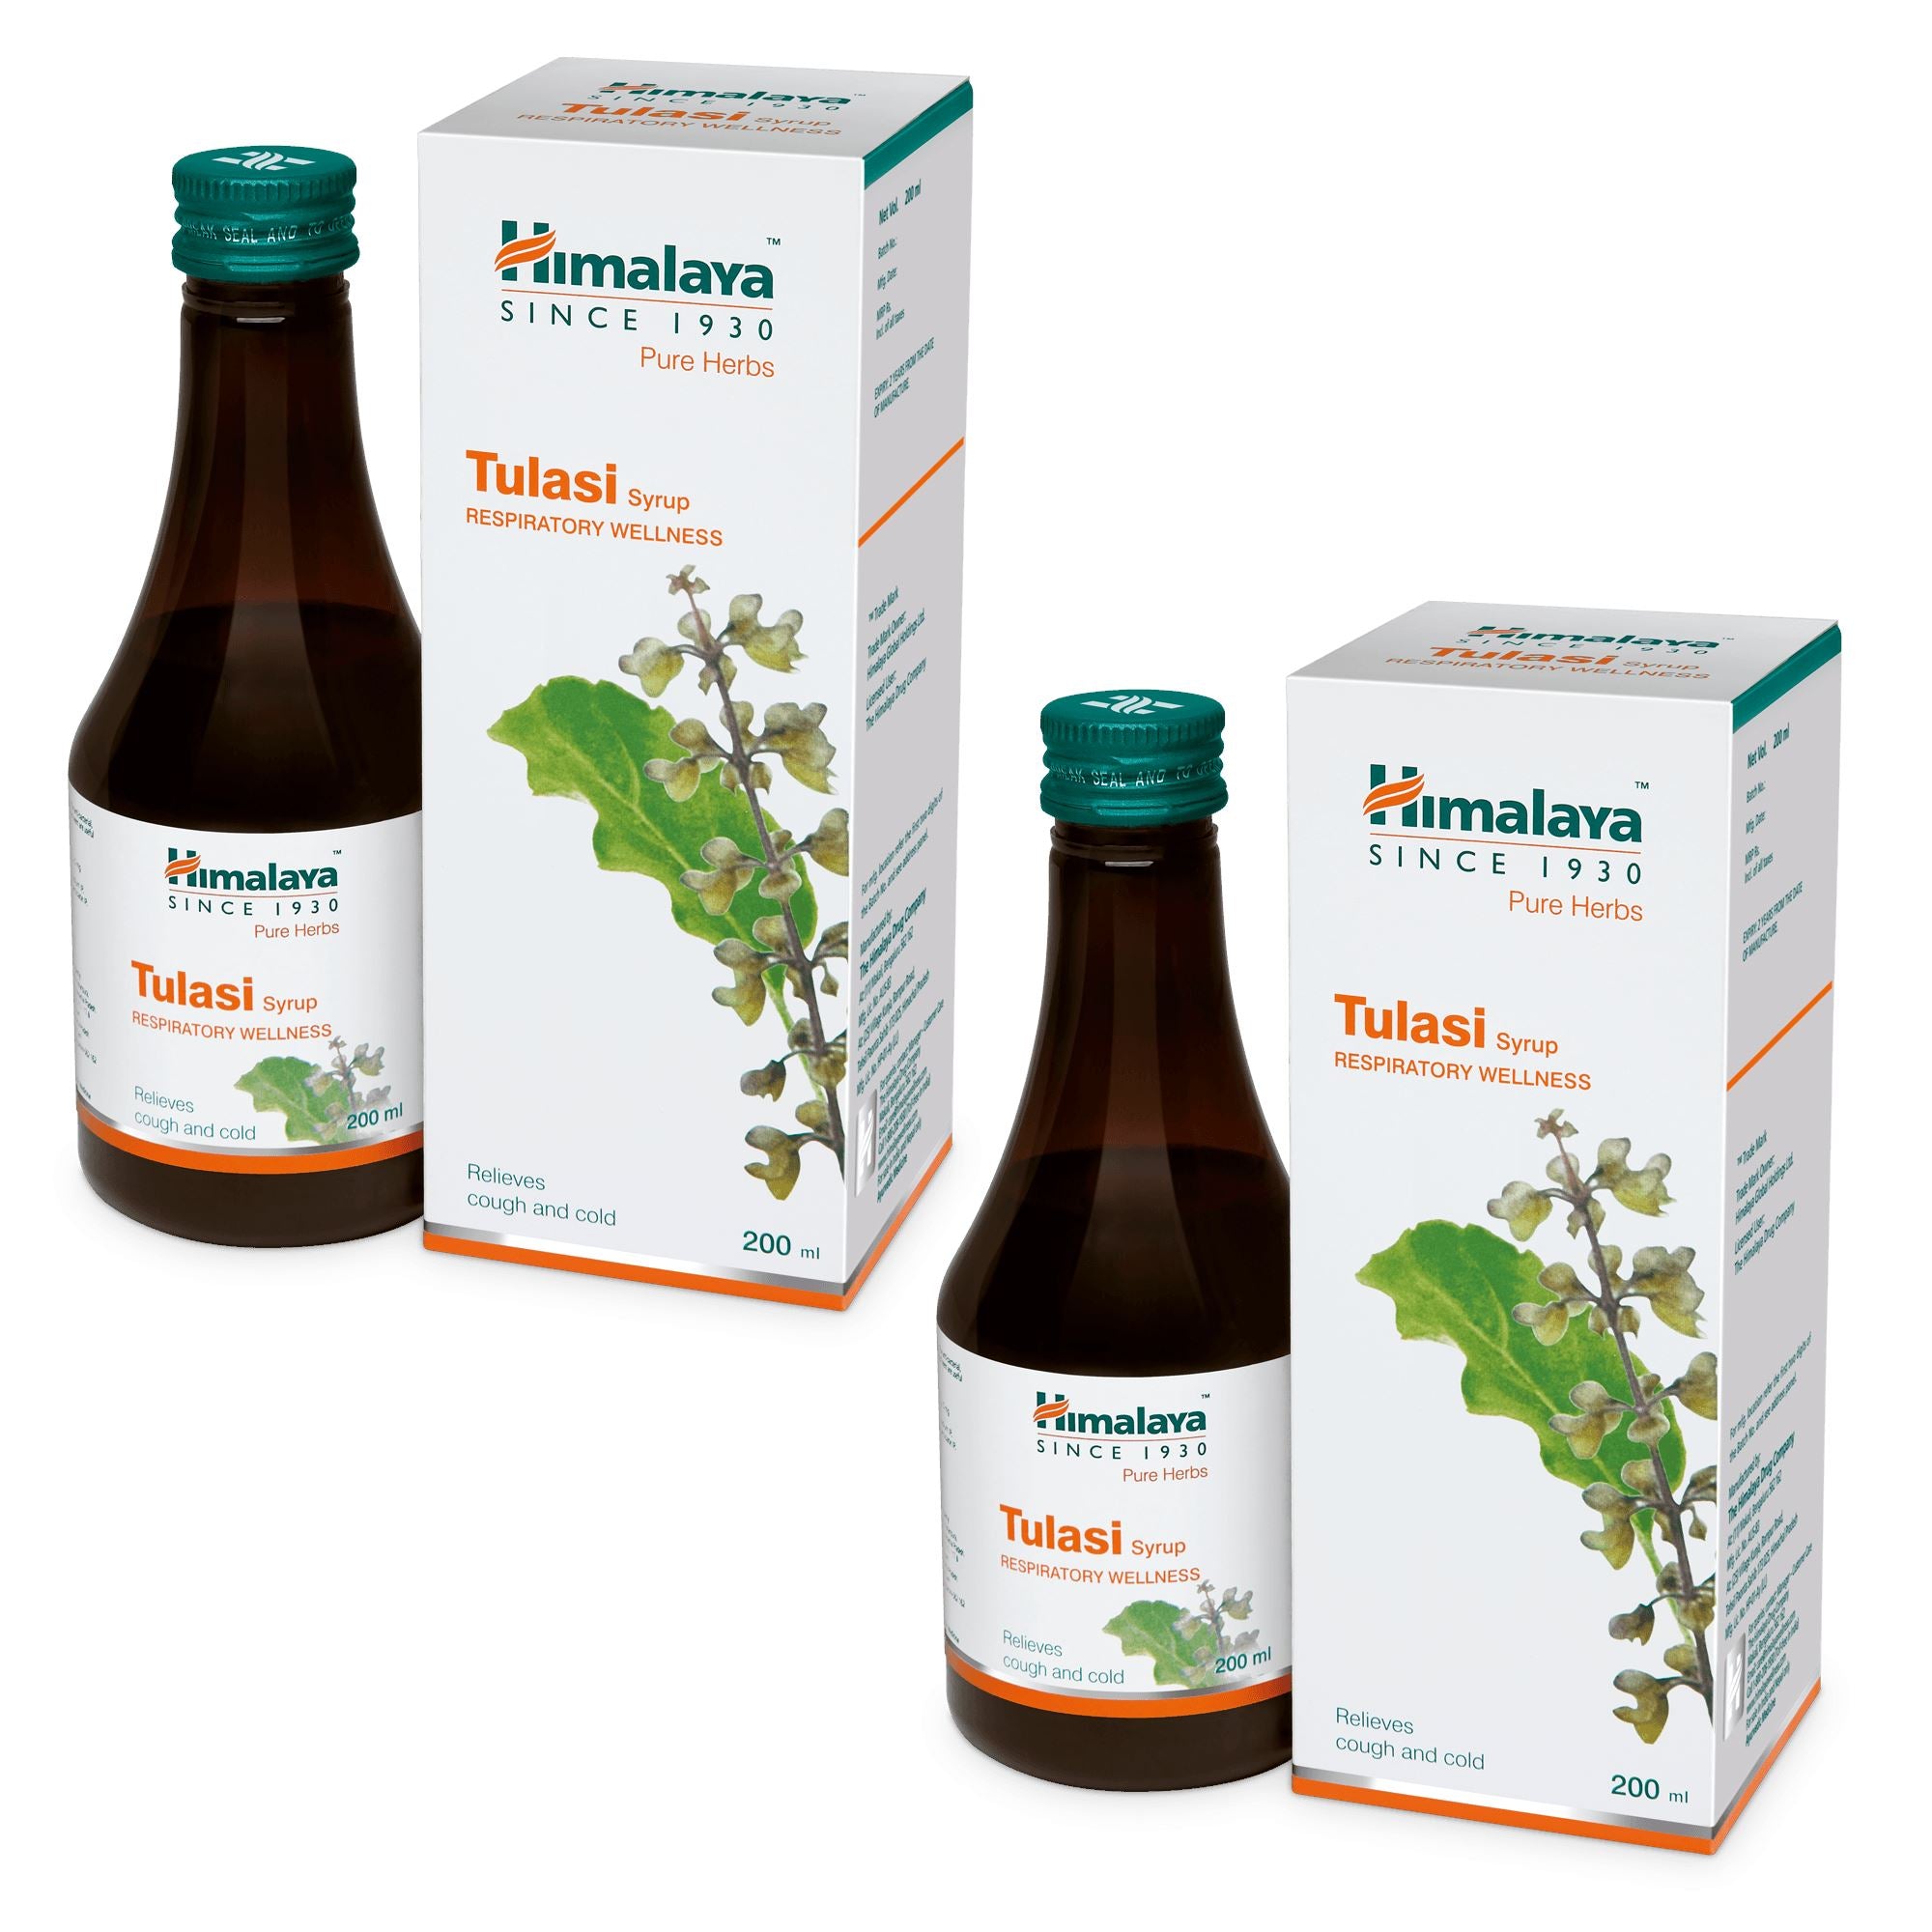 Himalaya Tulasi Syrup 200ml x 2 - Relieves Cough and Cold